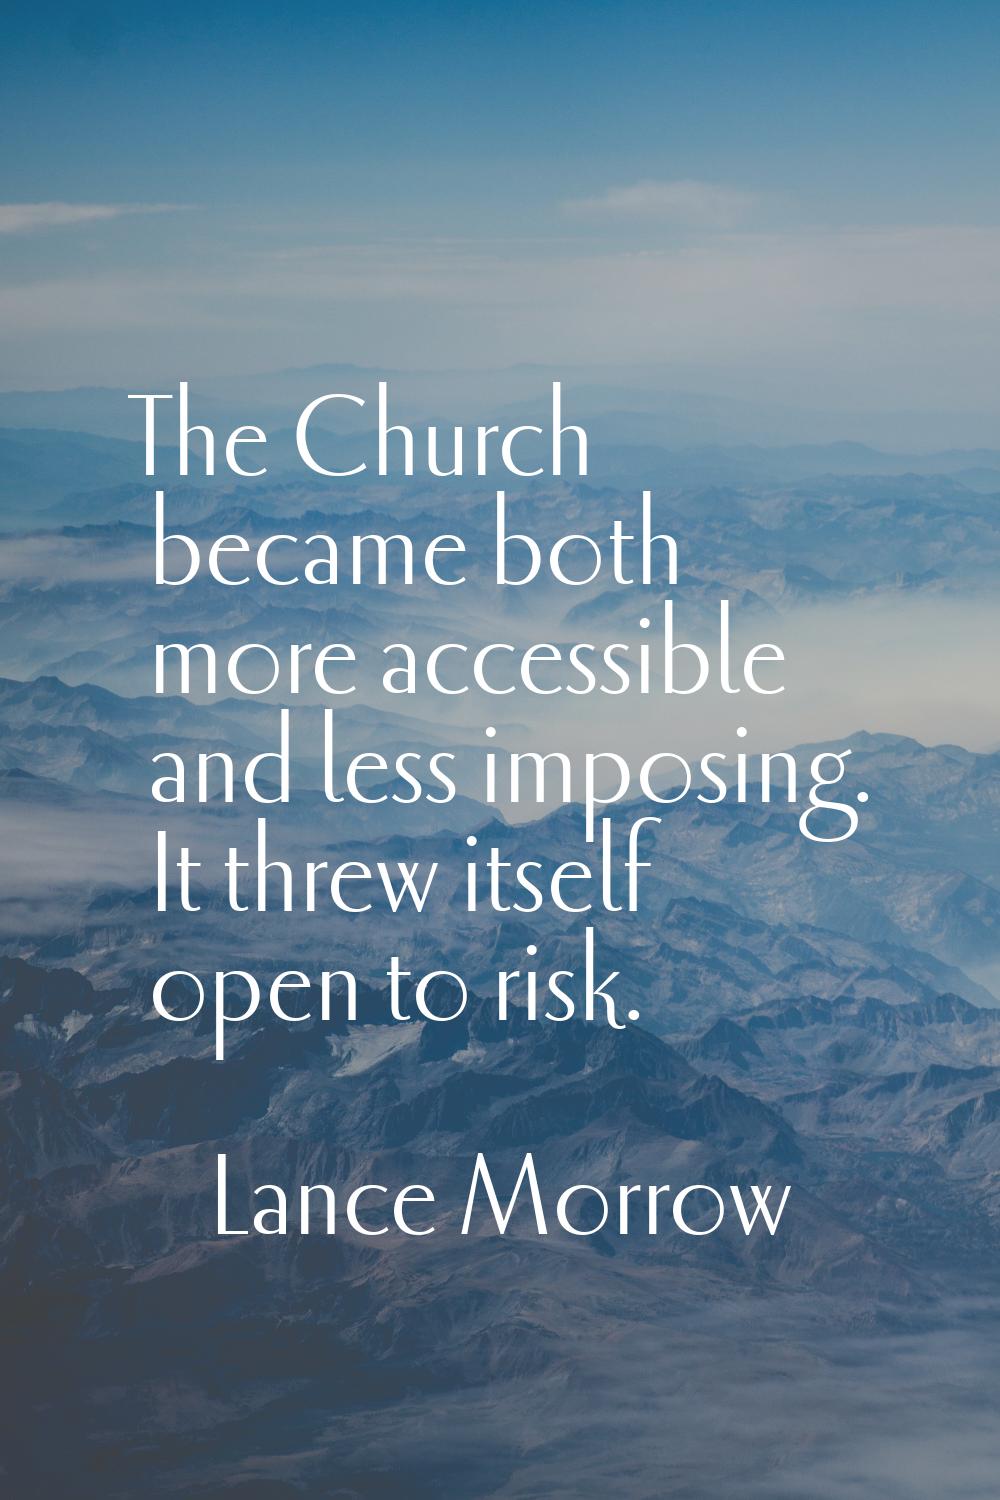 The Church became both more accessible and less imposing. It threw itself open to risk.